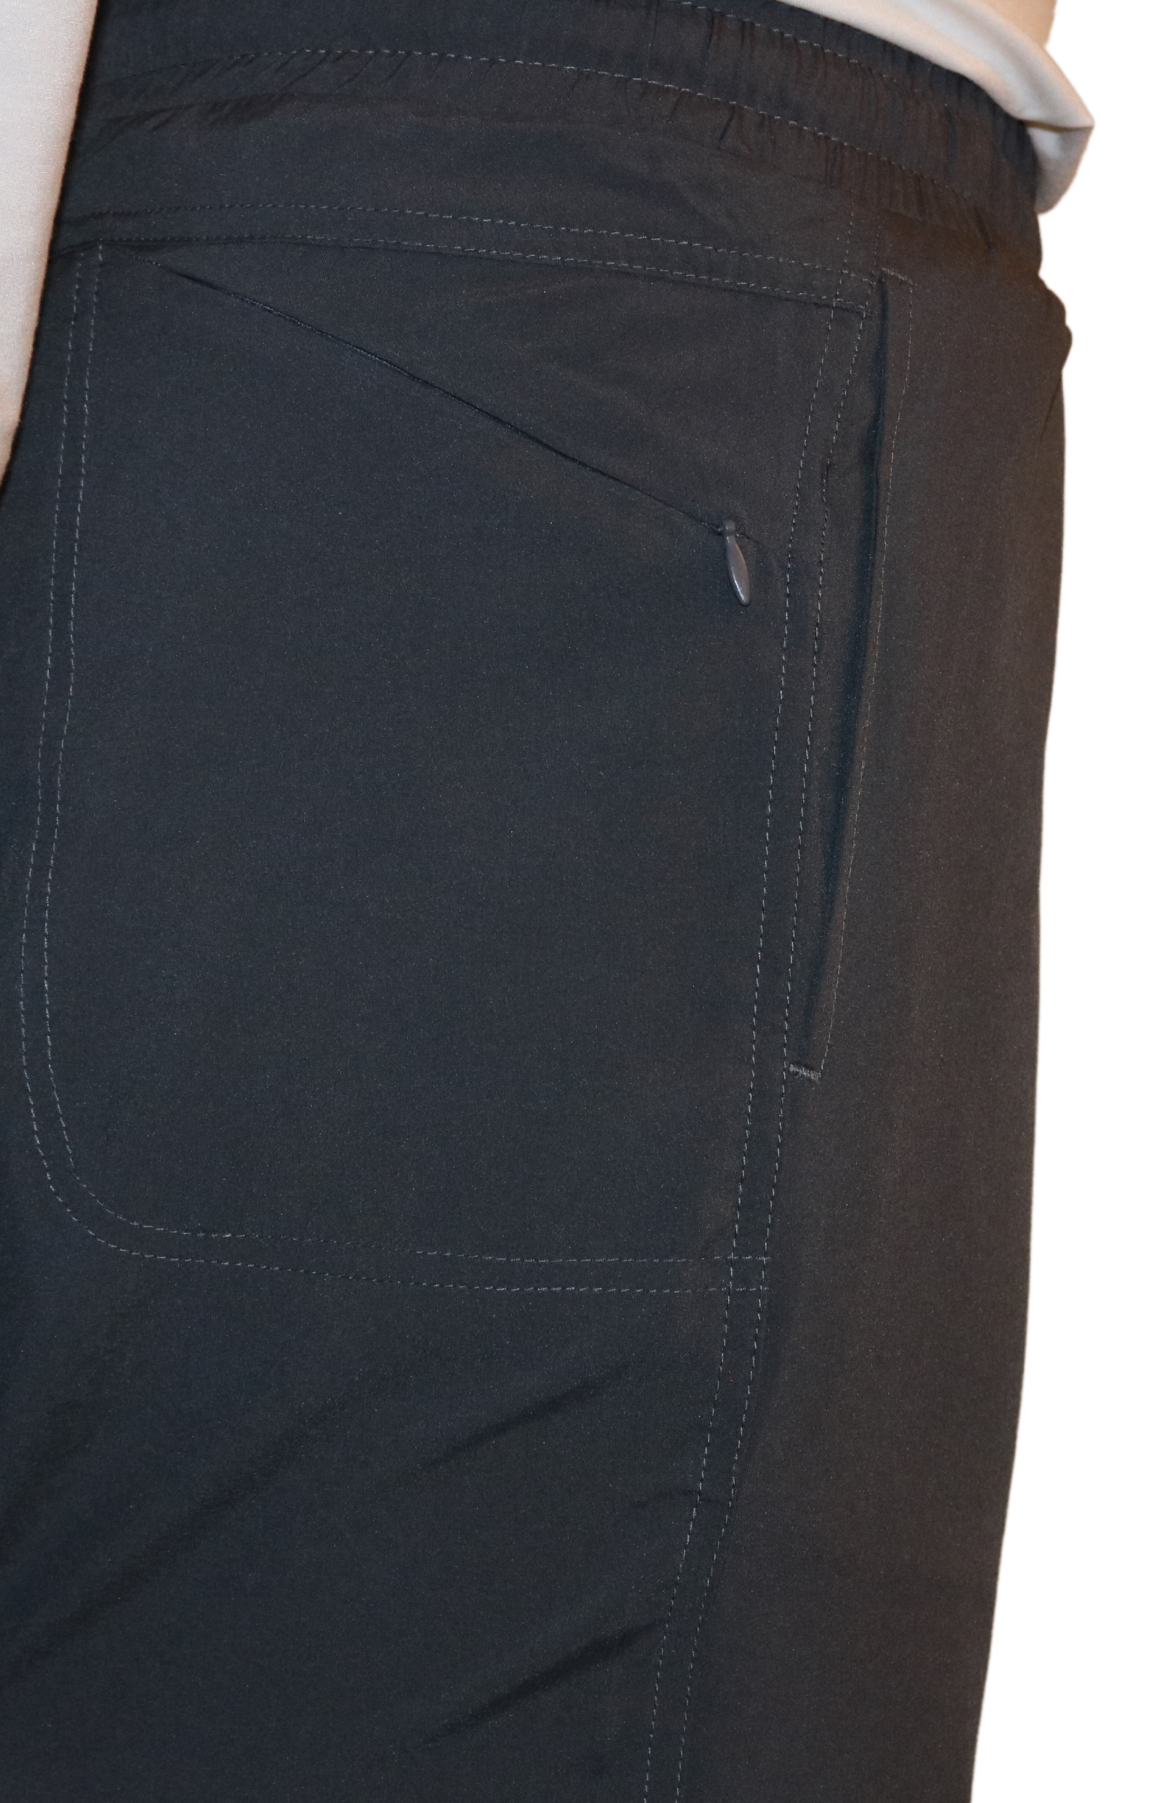 Back zipper pocket of the Bamboo Lined Sabalo Fishing Shorts. These fishing shorts are perfect for long days on the water.